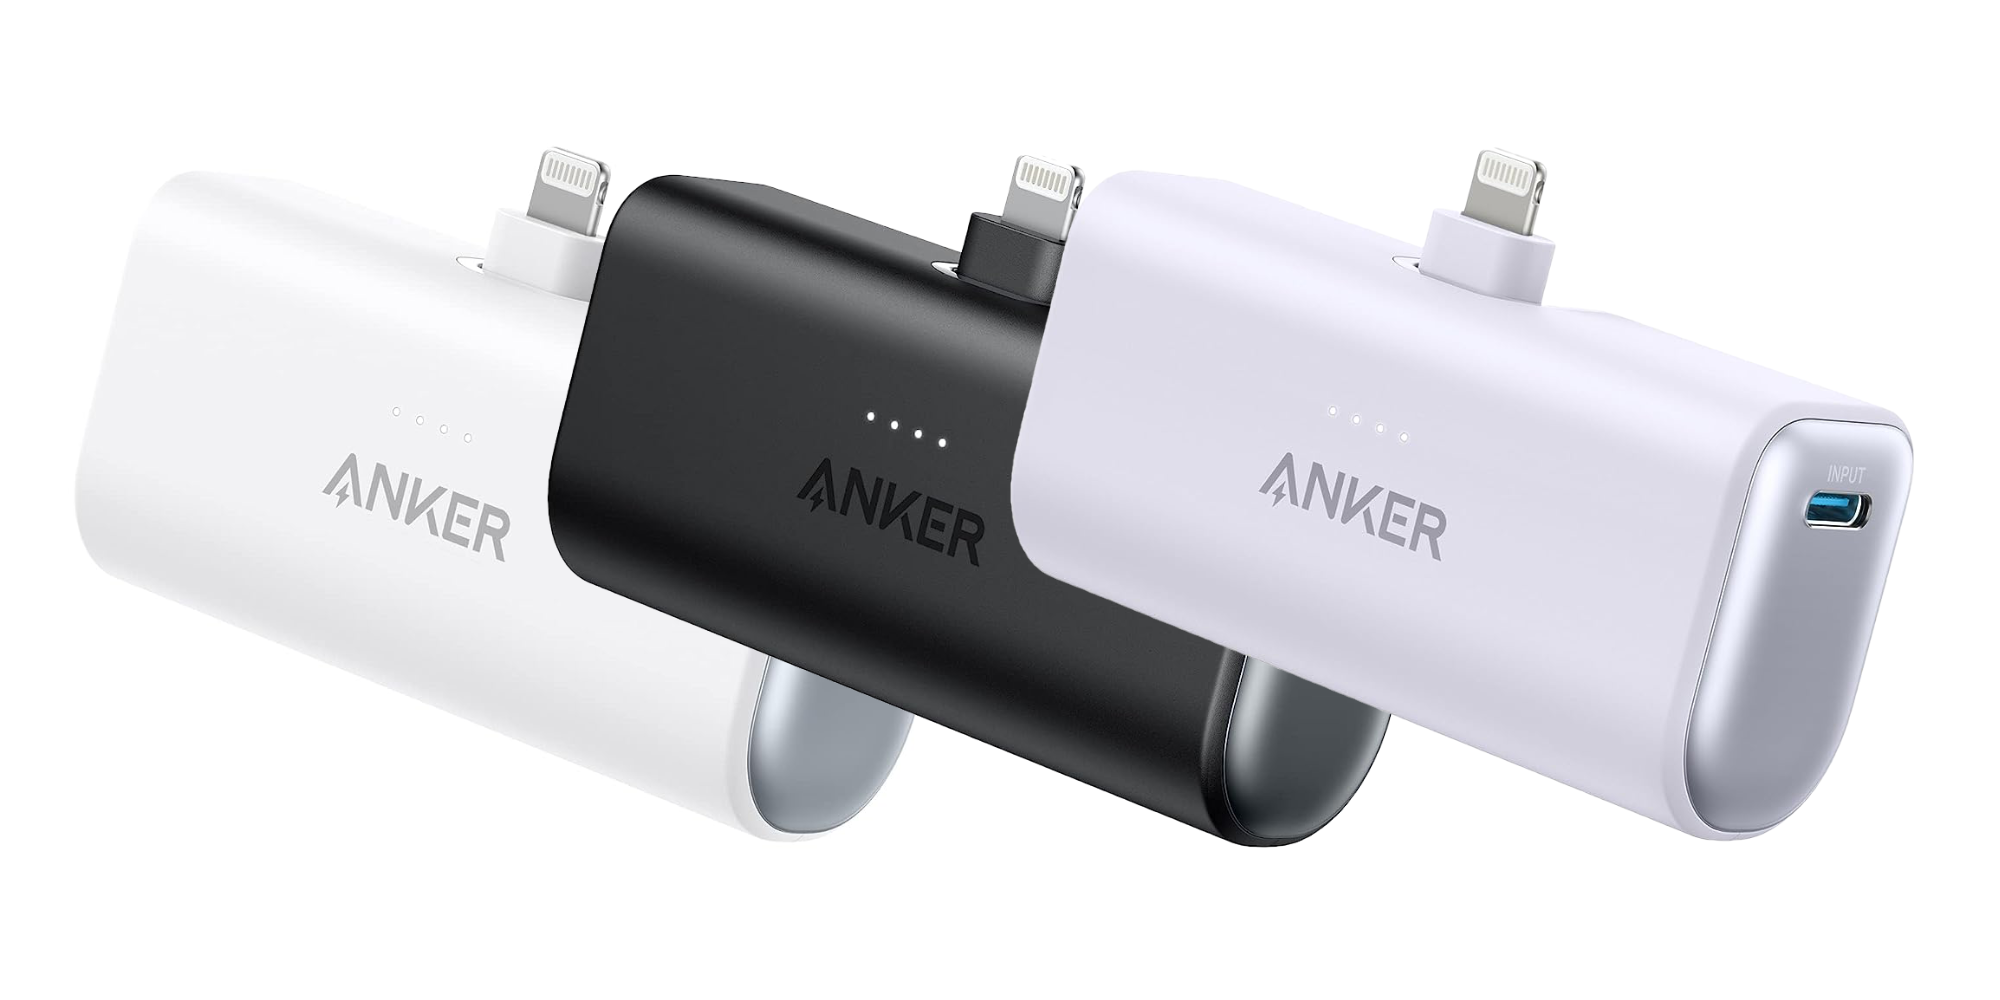 Anker's Latest Nano Series of Charging Accessories are Colorful